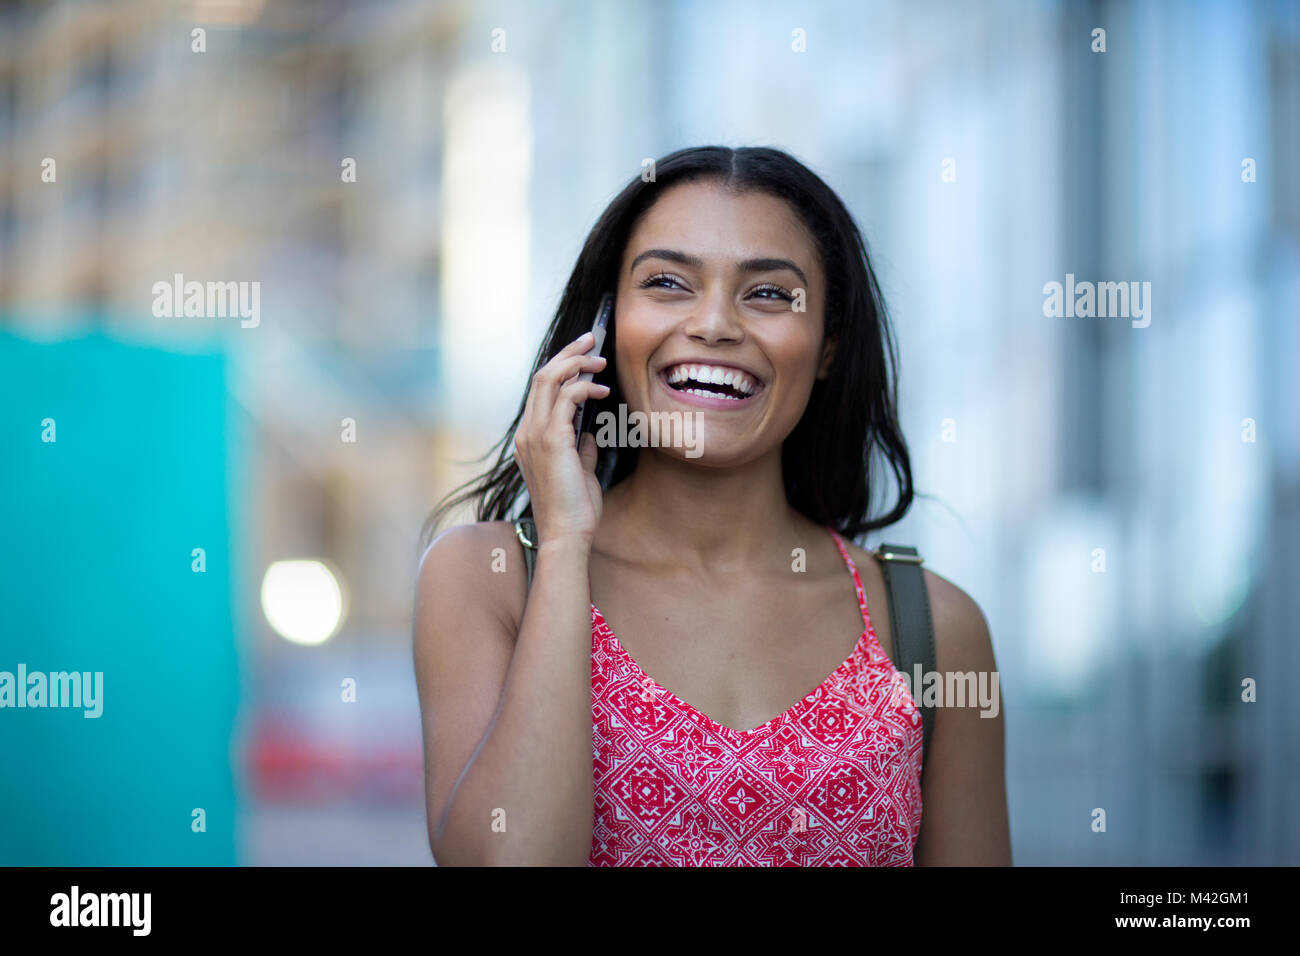 Young adult commuting and using smartphone Stock Photo